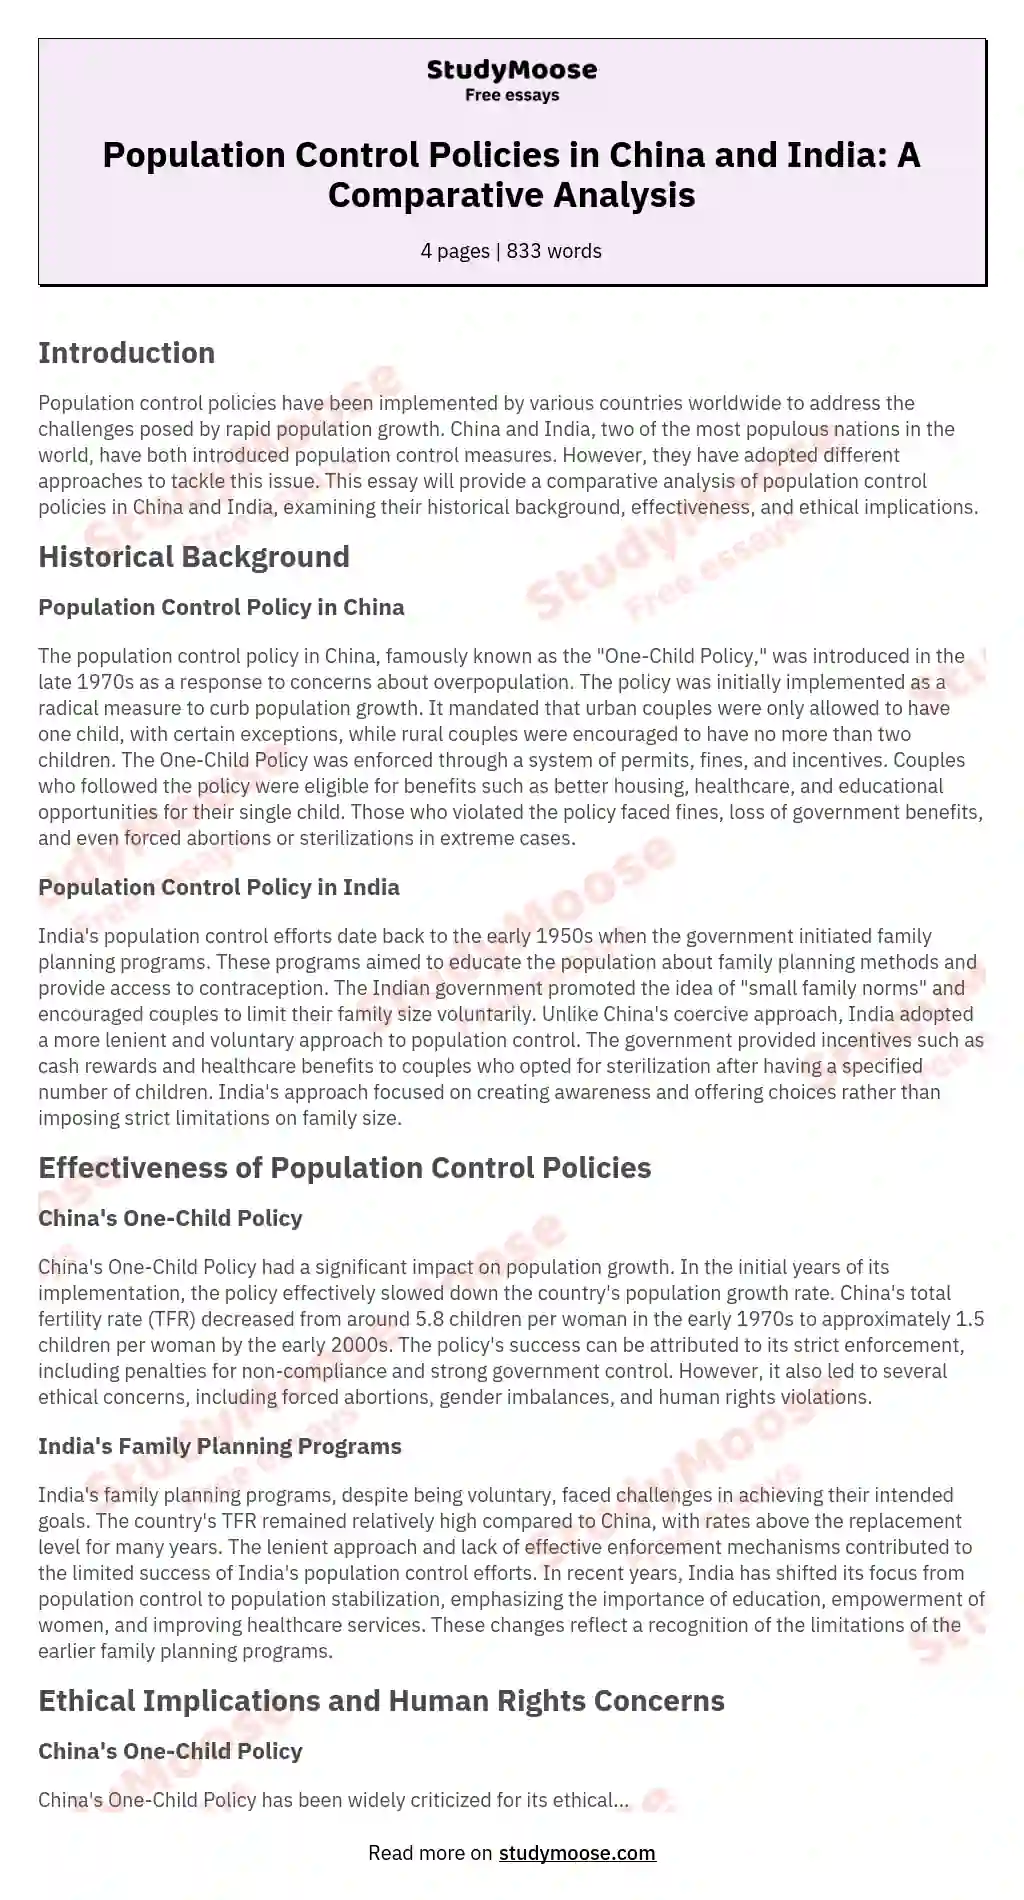 Population Control Policies in China and India: A Comparative Analysis essay